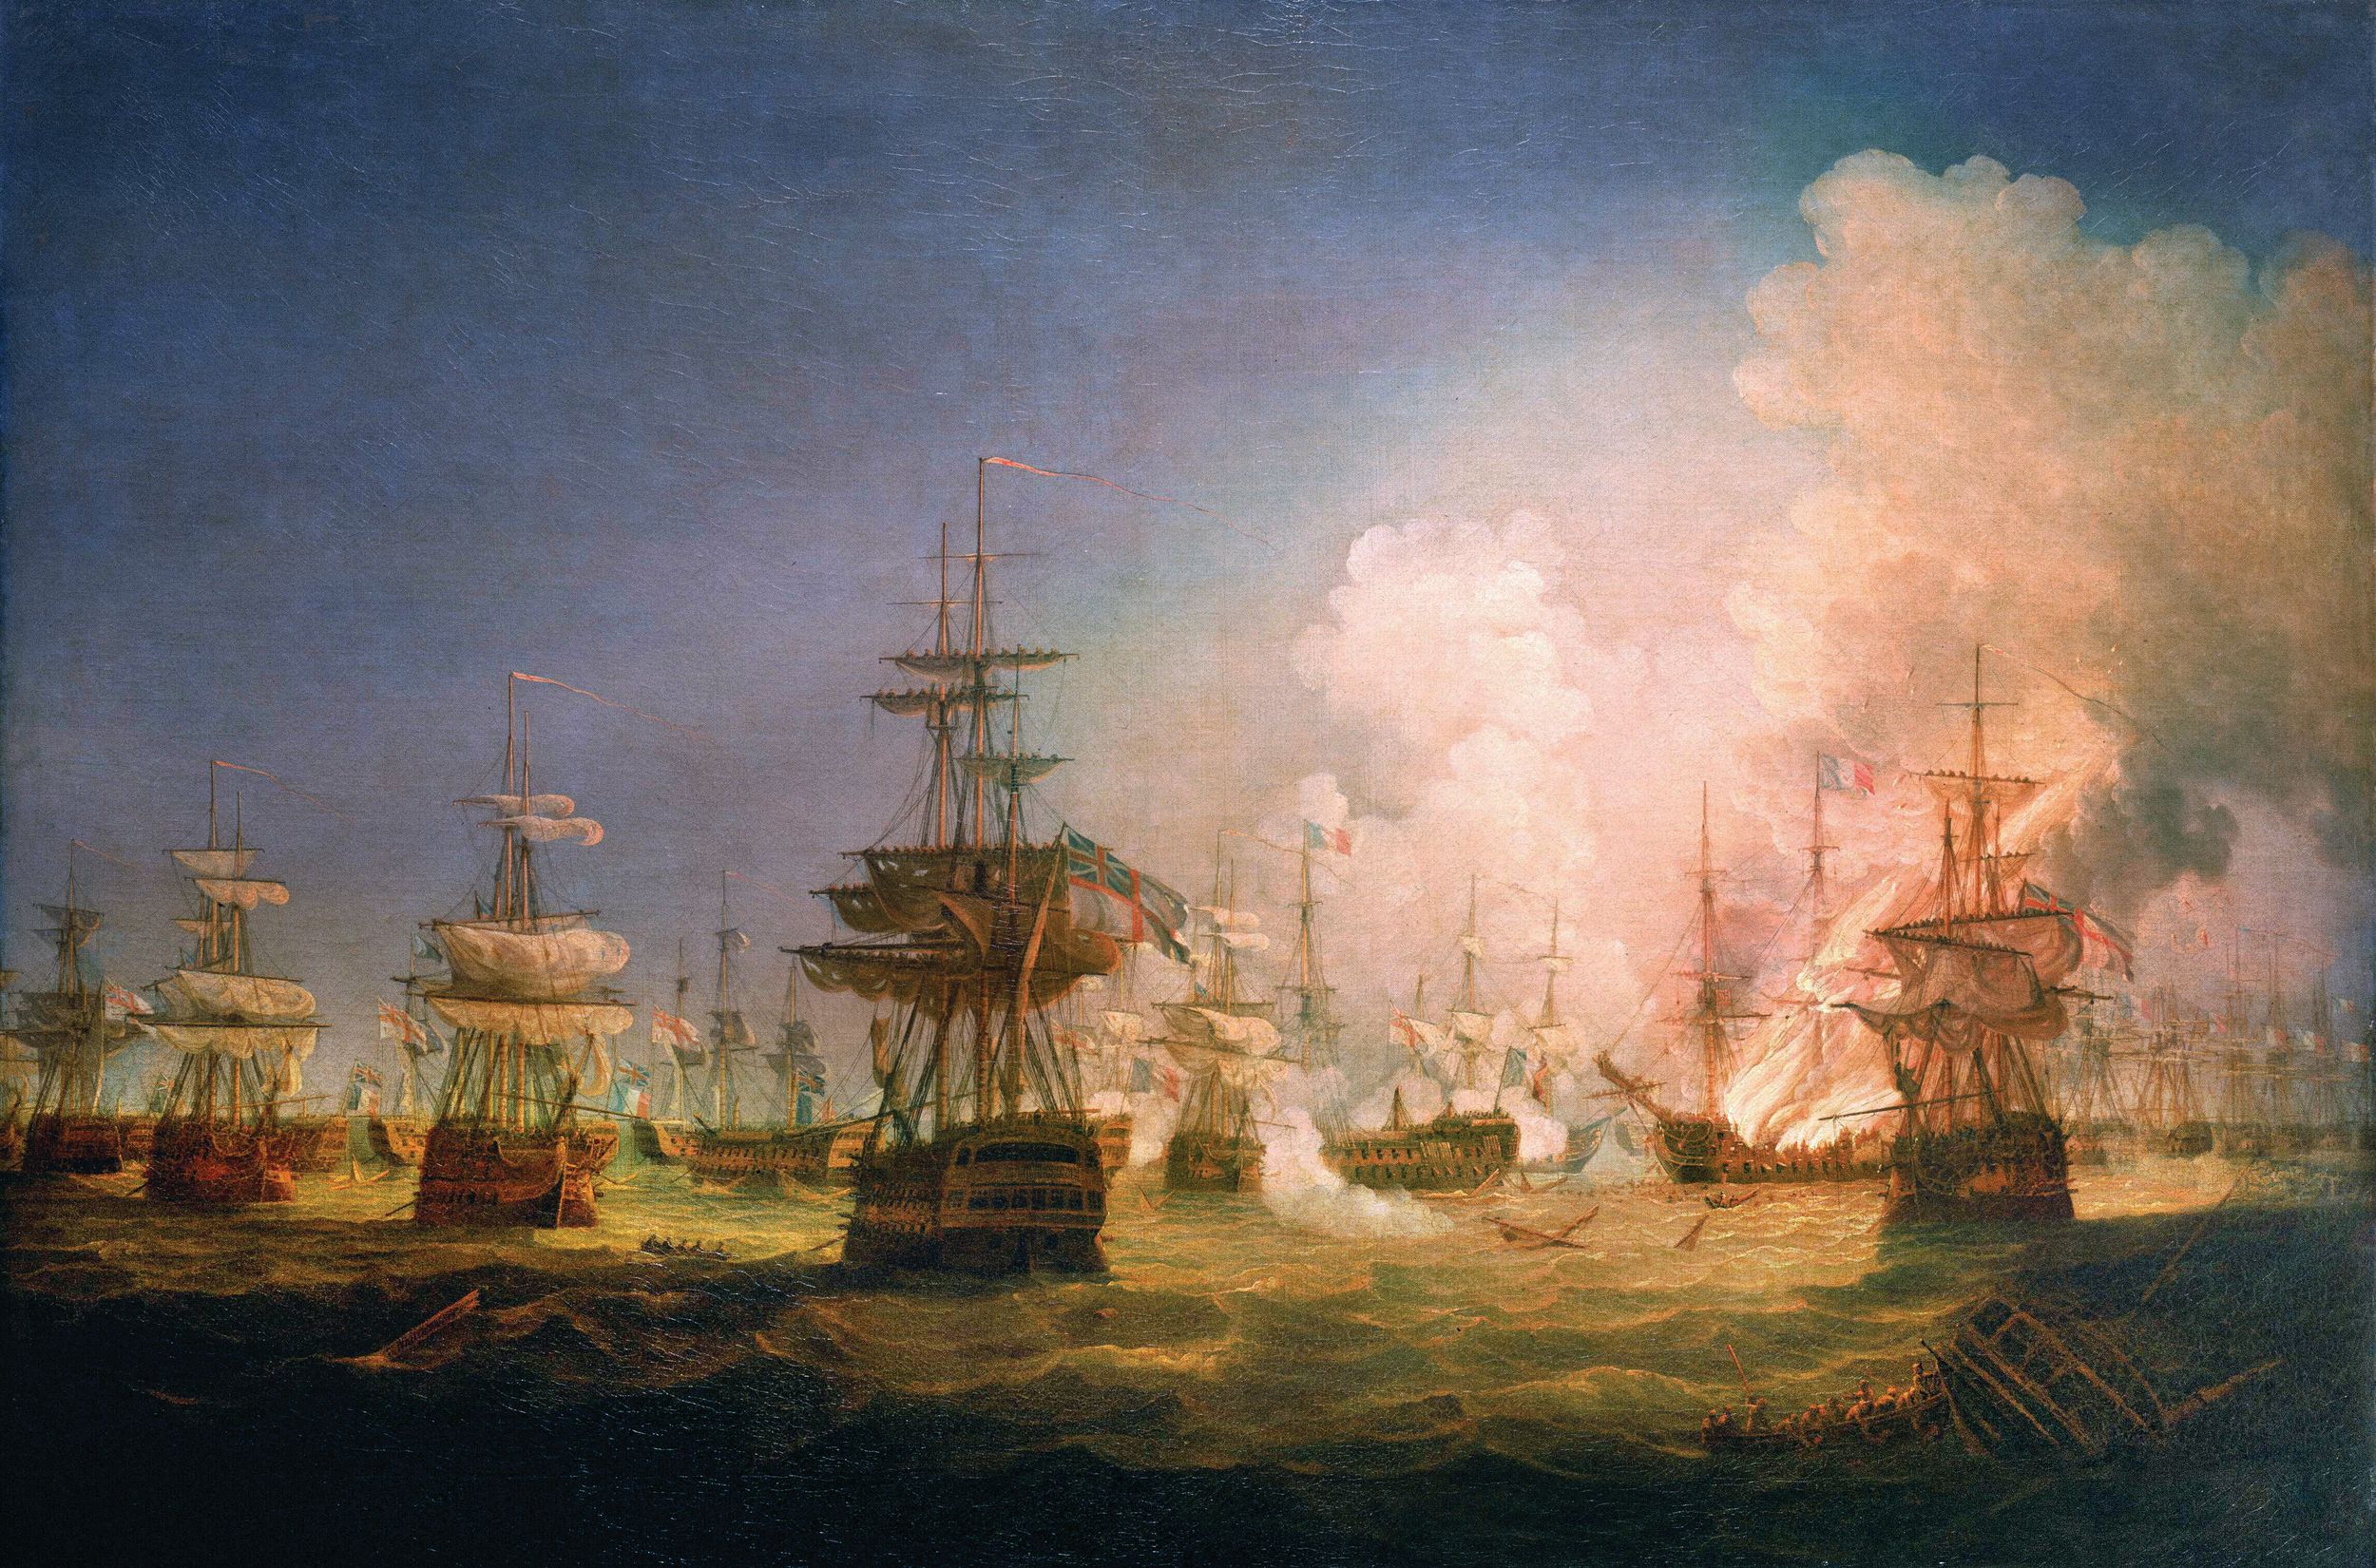 The French flagship Orient is shown engulfed in flames in this painting by Thomas Whitcombe. The ships nearby have closed their gun ports in anticipation of the ship’s magazine igniting a large explosion.  Around 10 p.m., it came, blowing the Orient's hull out of the water and killing as many as 800 sailors. 